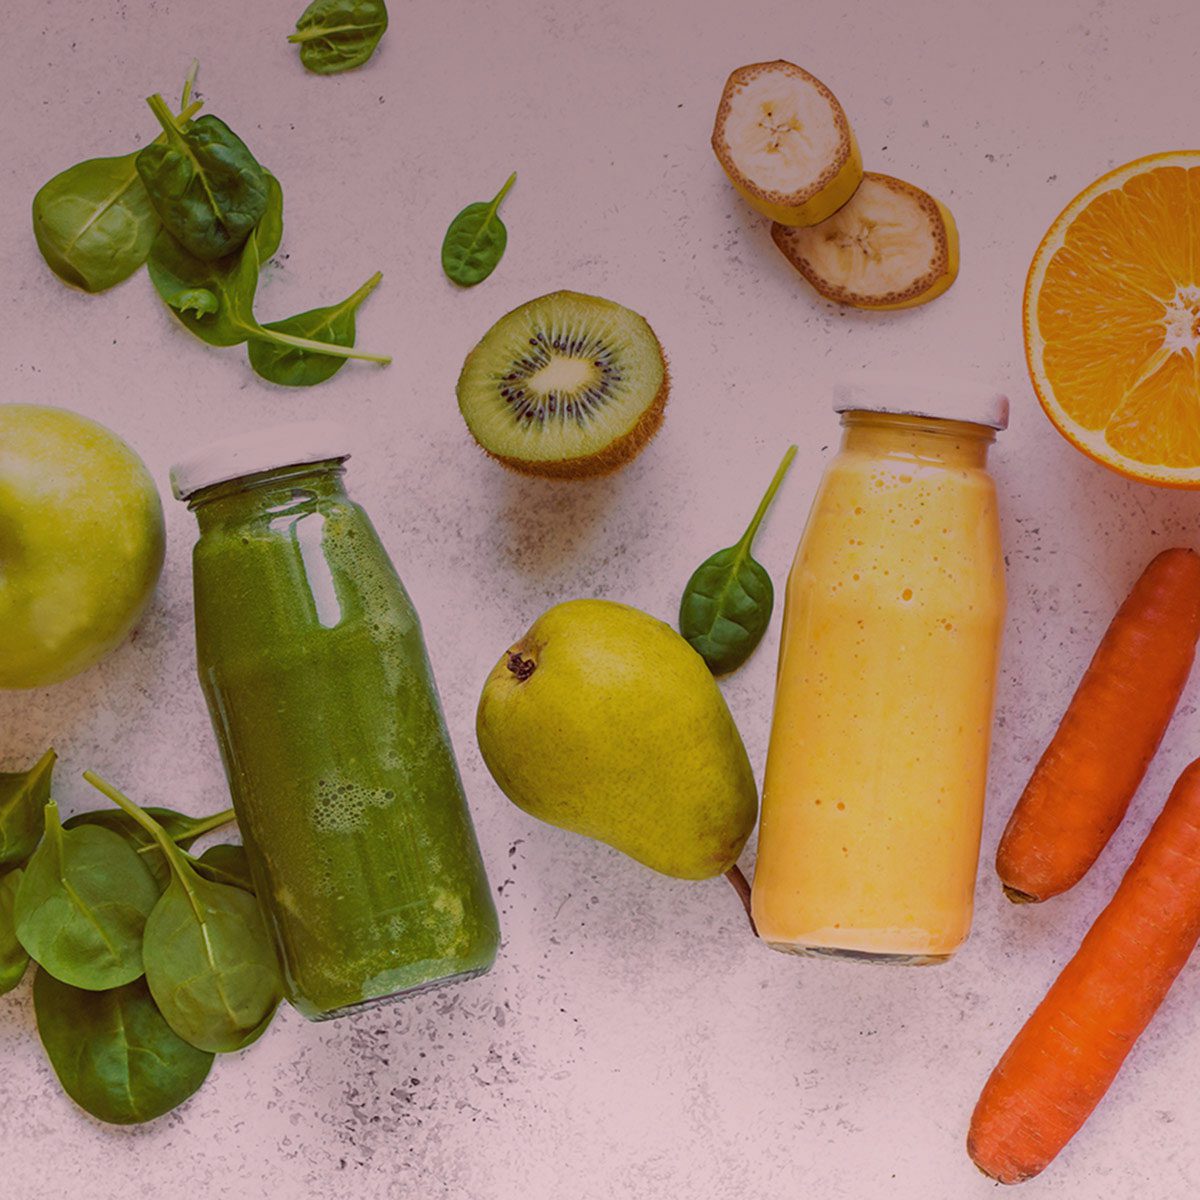 Juice bottles, fruit and vegetables from above